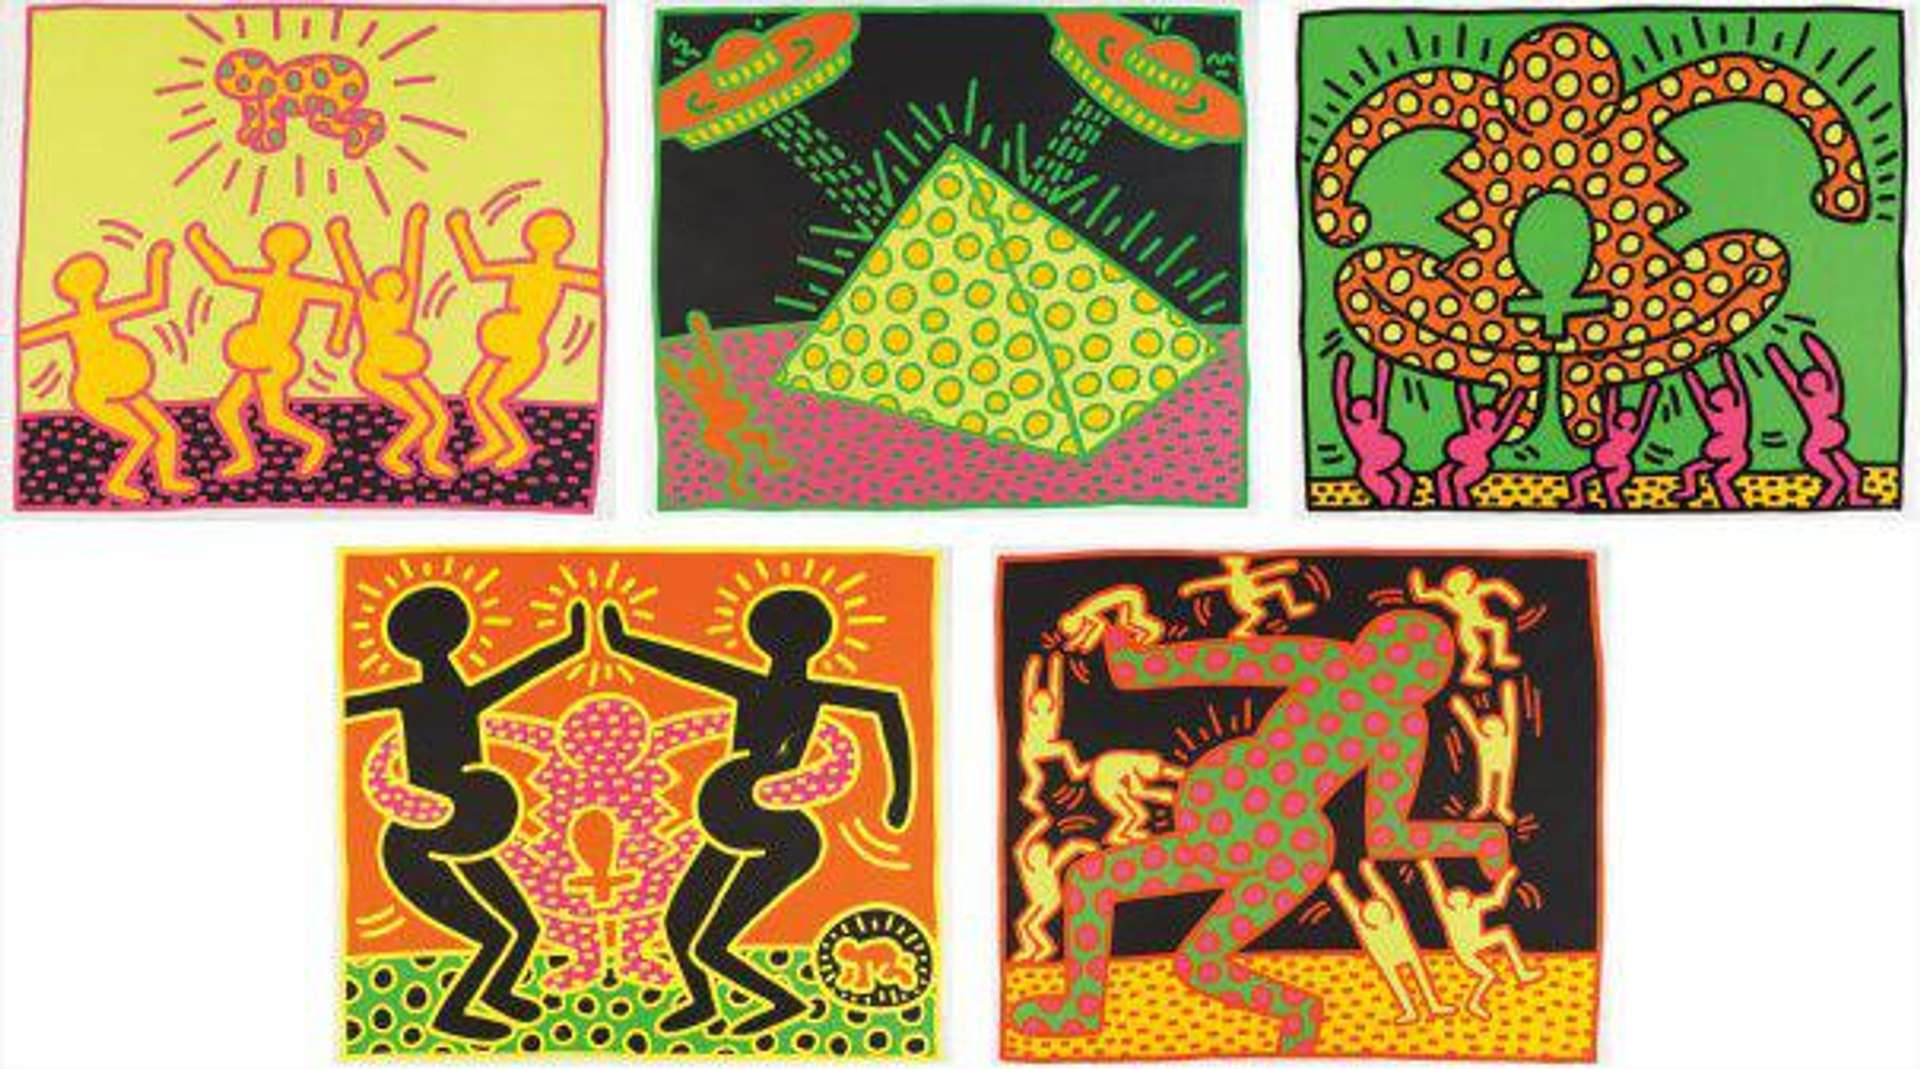 Fertility Suite (complete) by Keith Haring